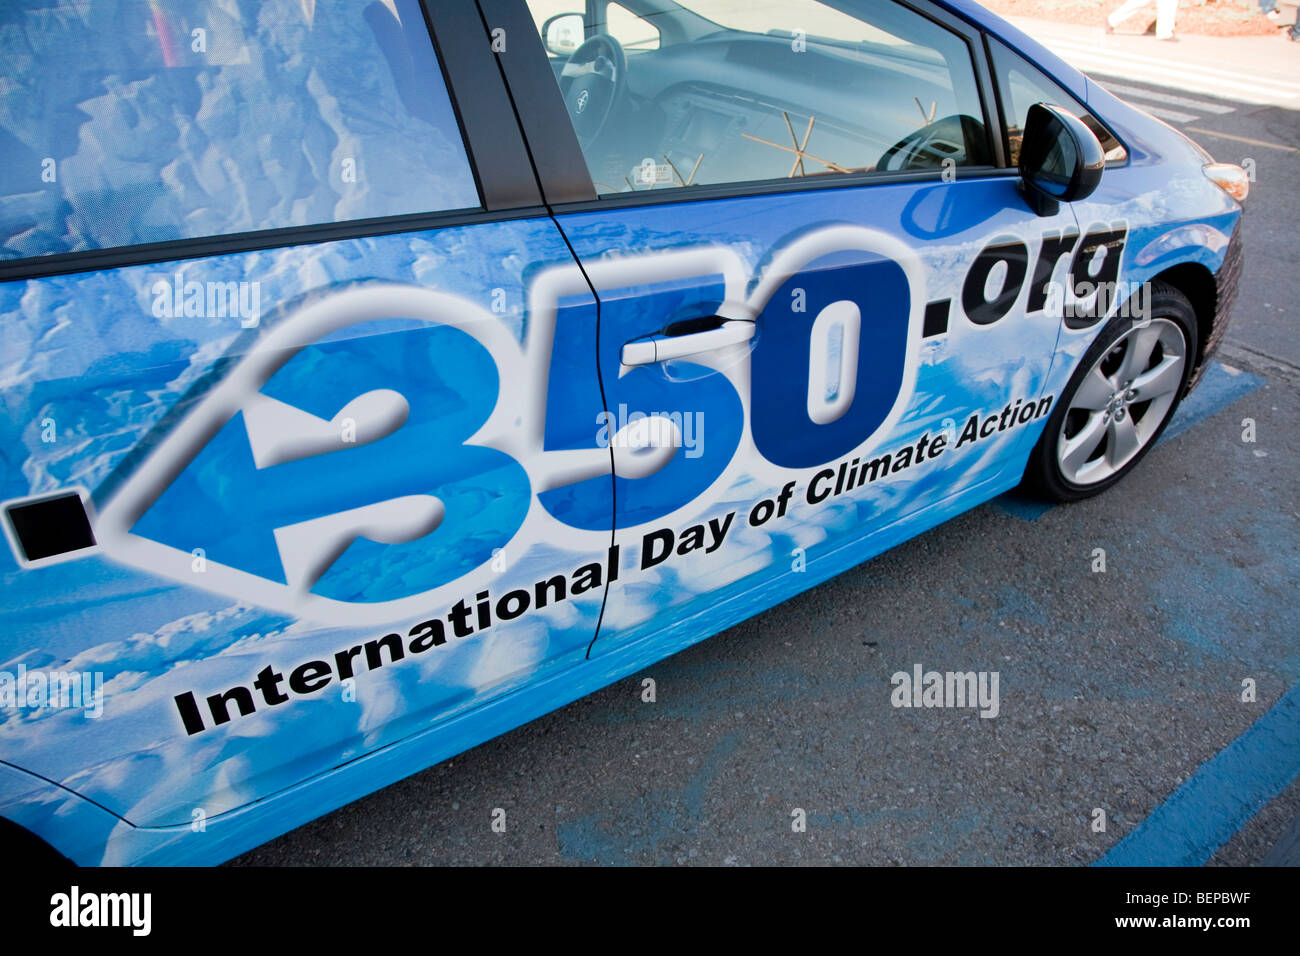 350.org International Day of Climate Action advertising on a Toyota Prius hybrid. San Francisco, California, United States (USA) Stock Photo